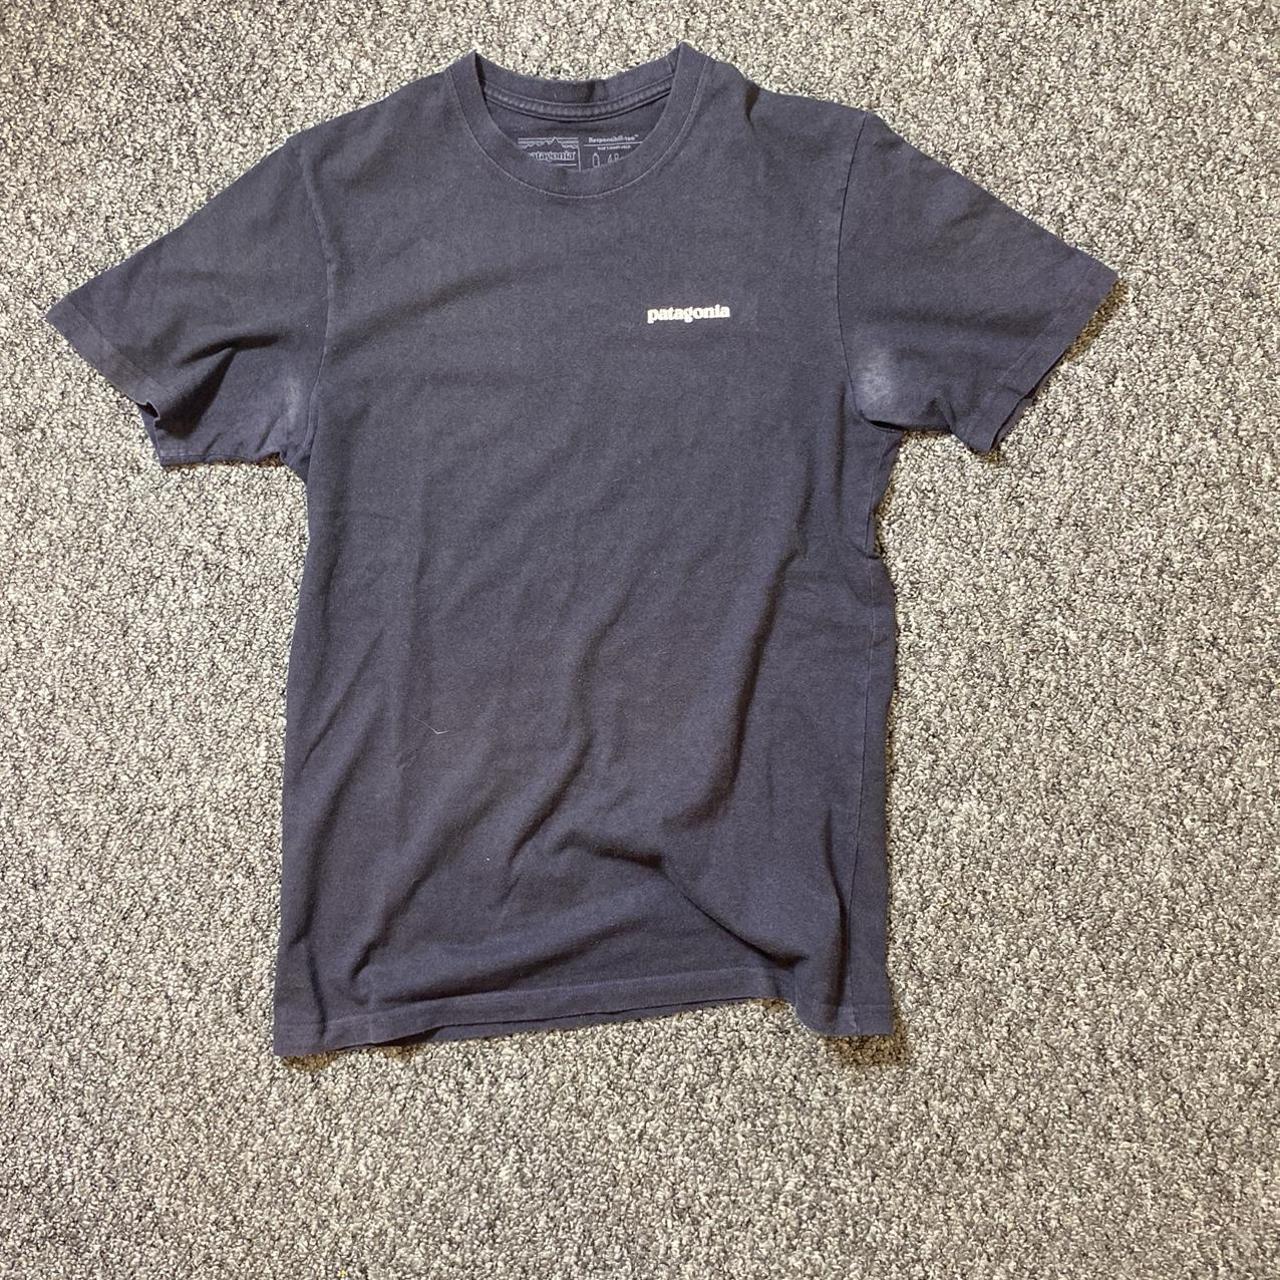 Navy patagonia t shirt Condition: Used but high... - Depop